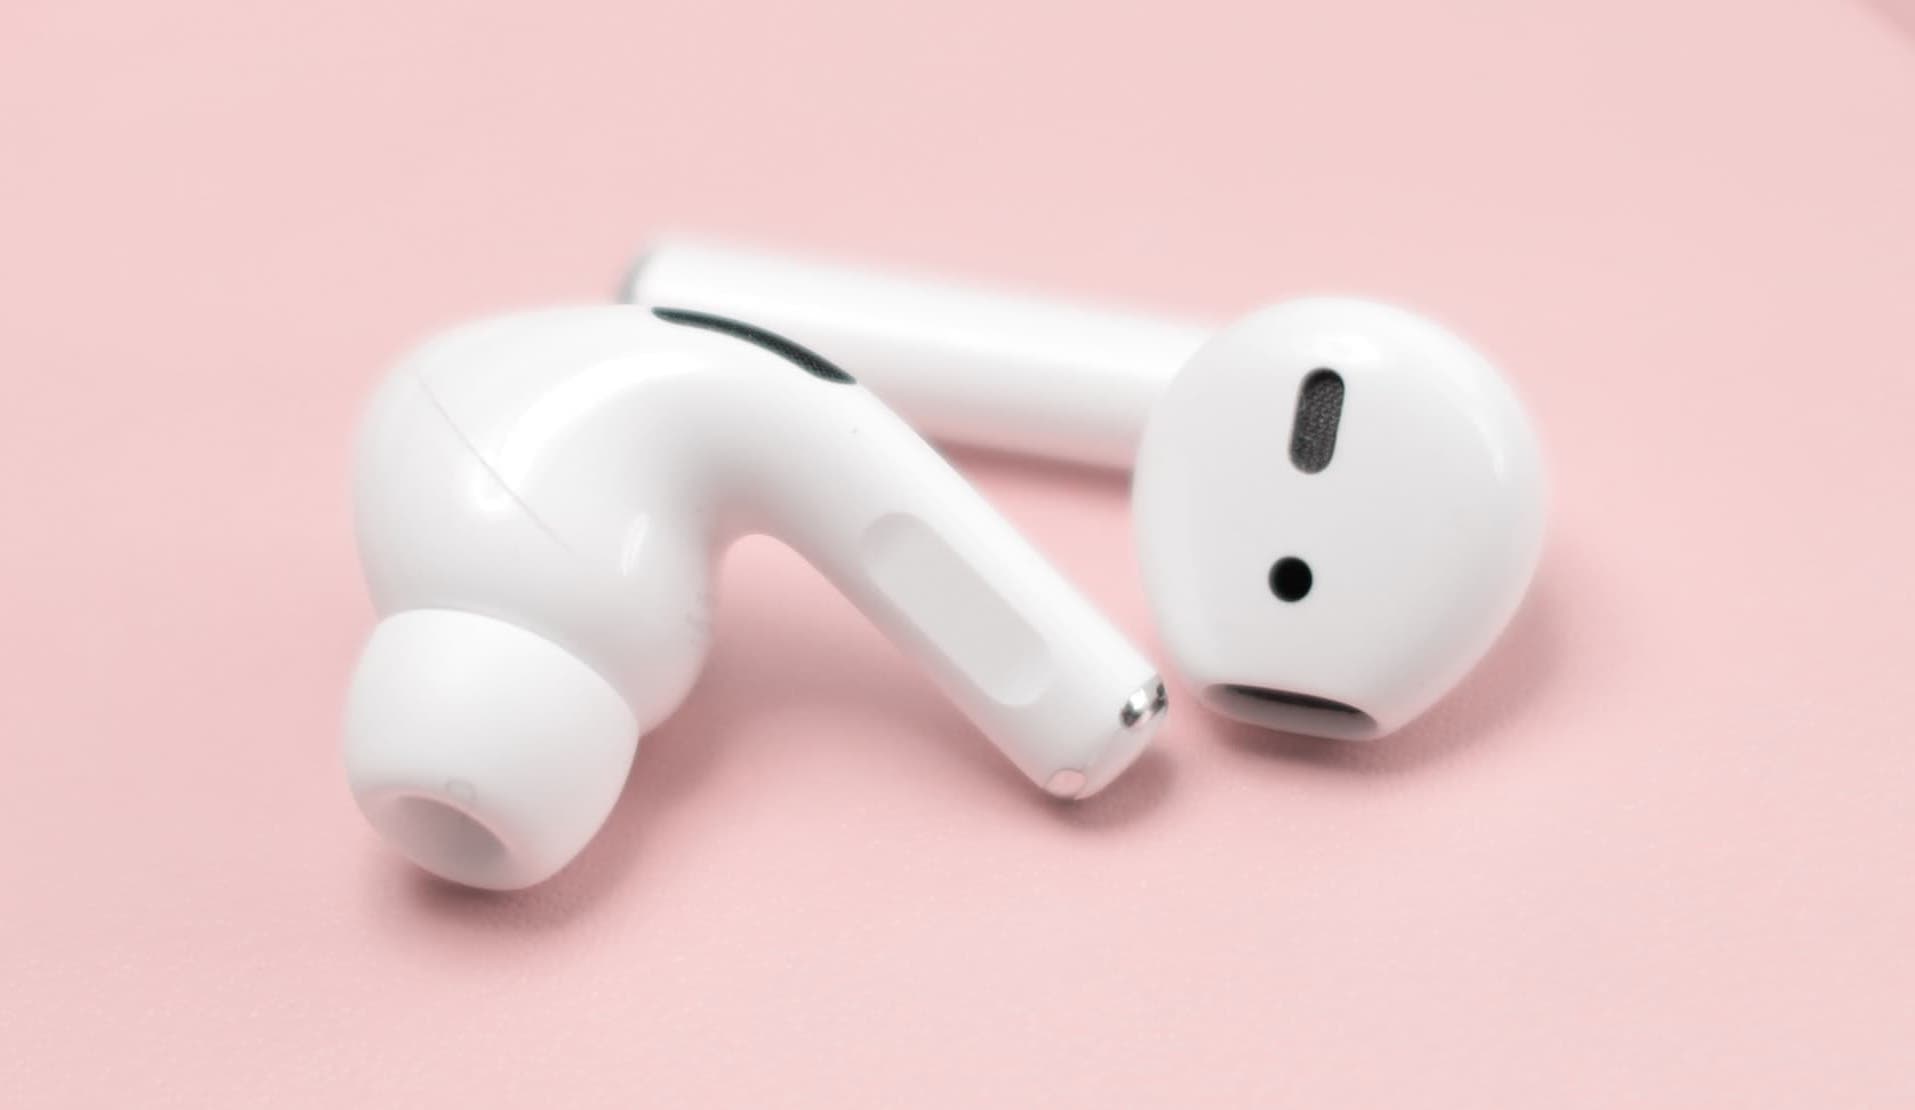 Single AirPod and AirPods Pro kept together.